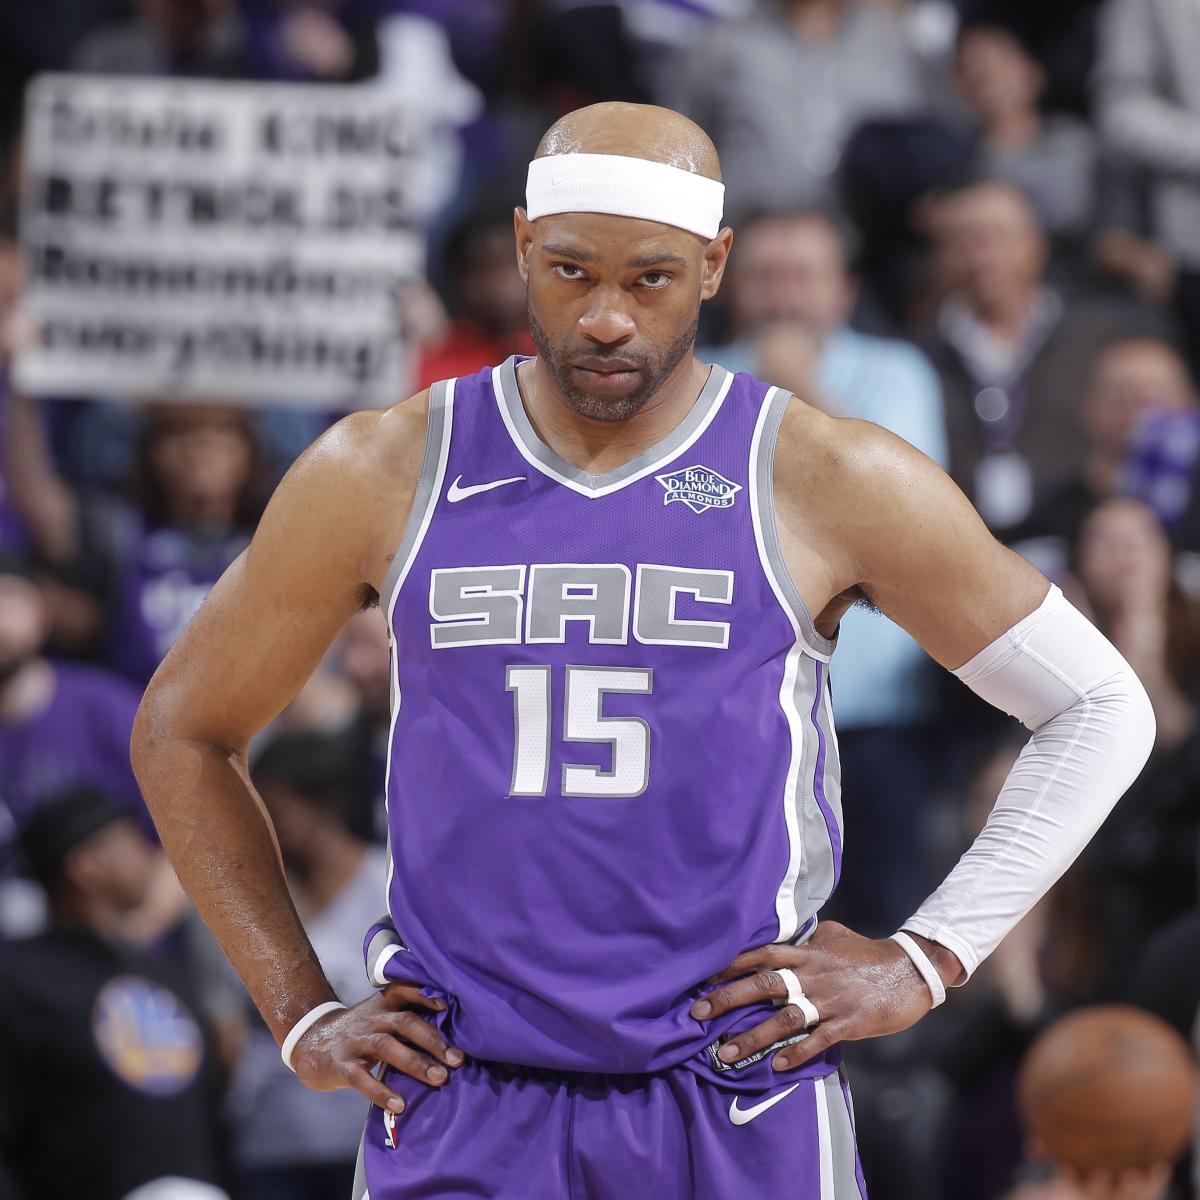 Vince Carter: 'It's still an honor to be in the league at 41